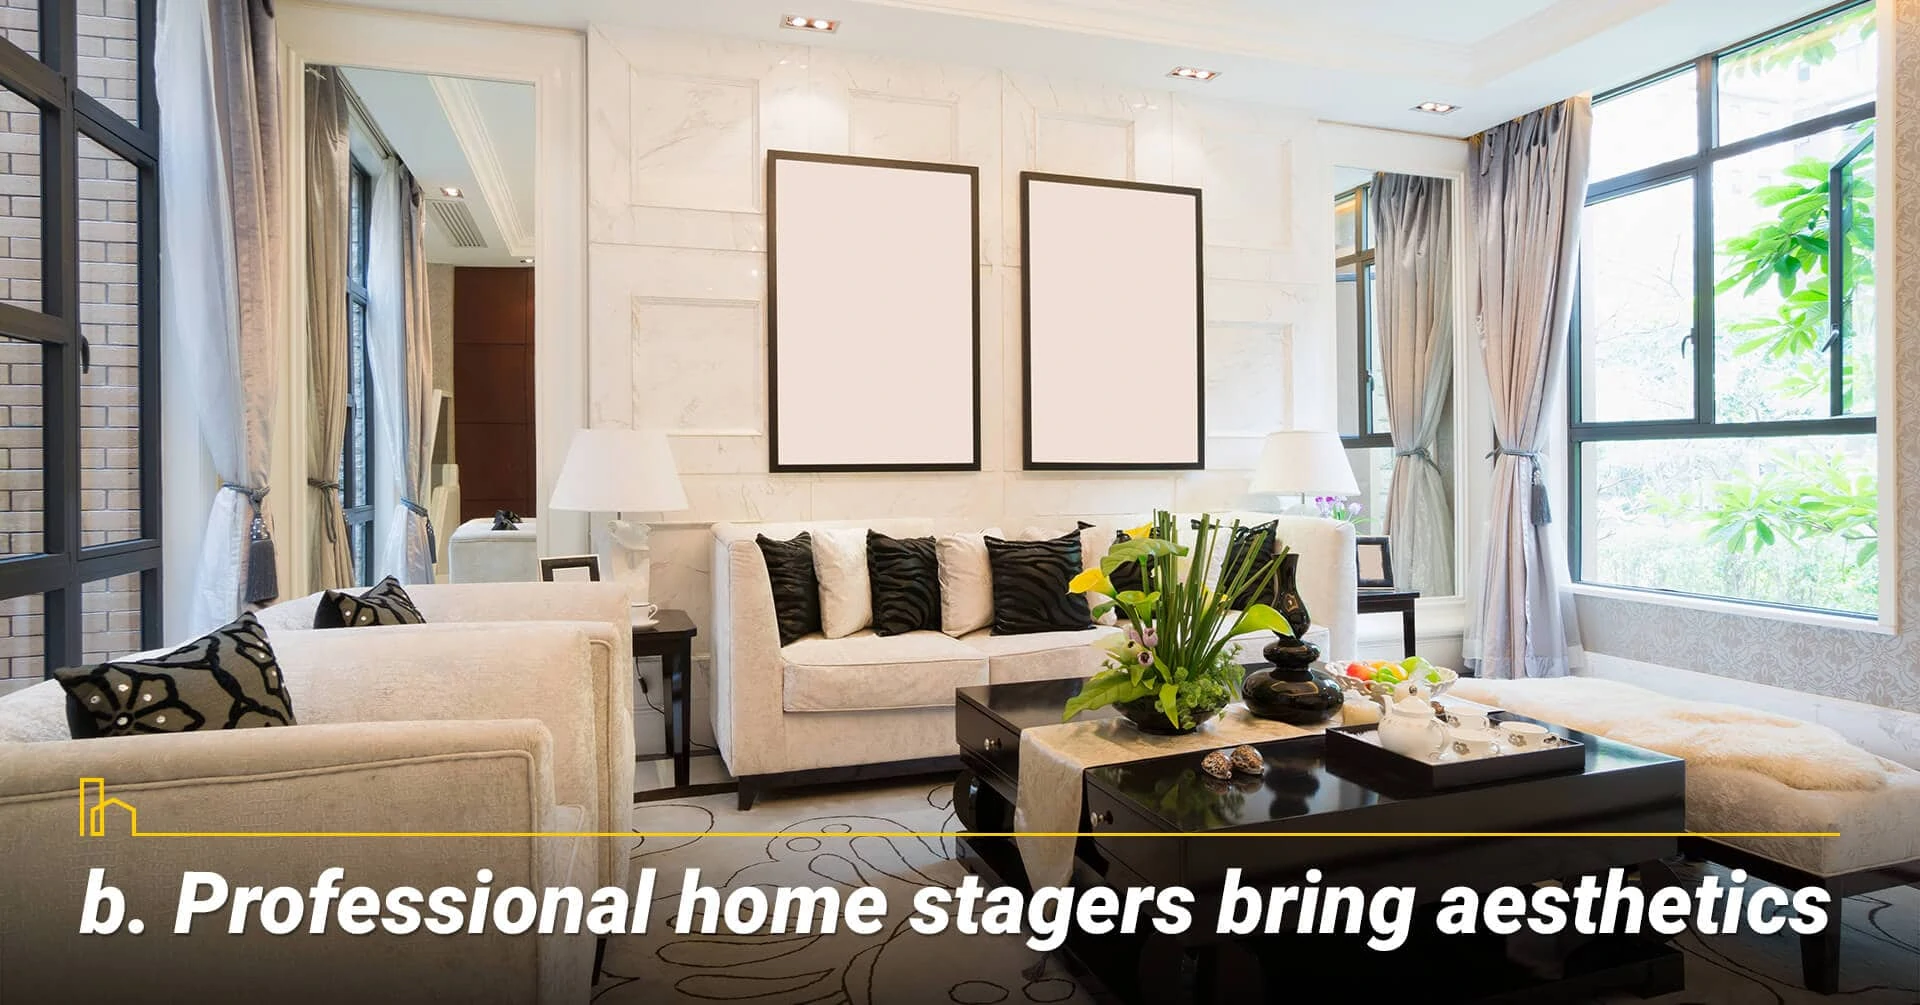 Professional home stagers bring aesthetics, show the aesthetics of your home